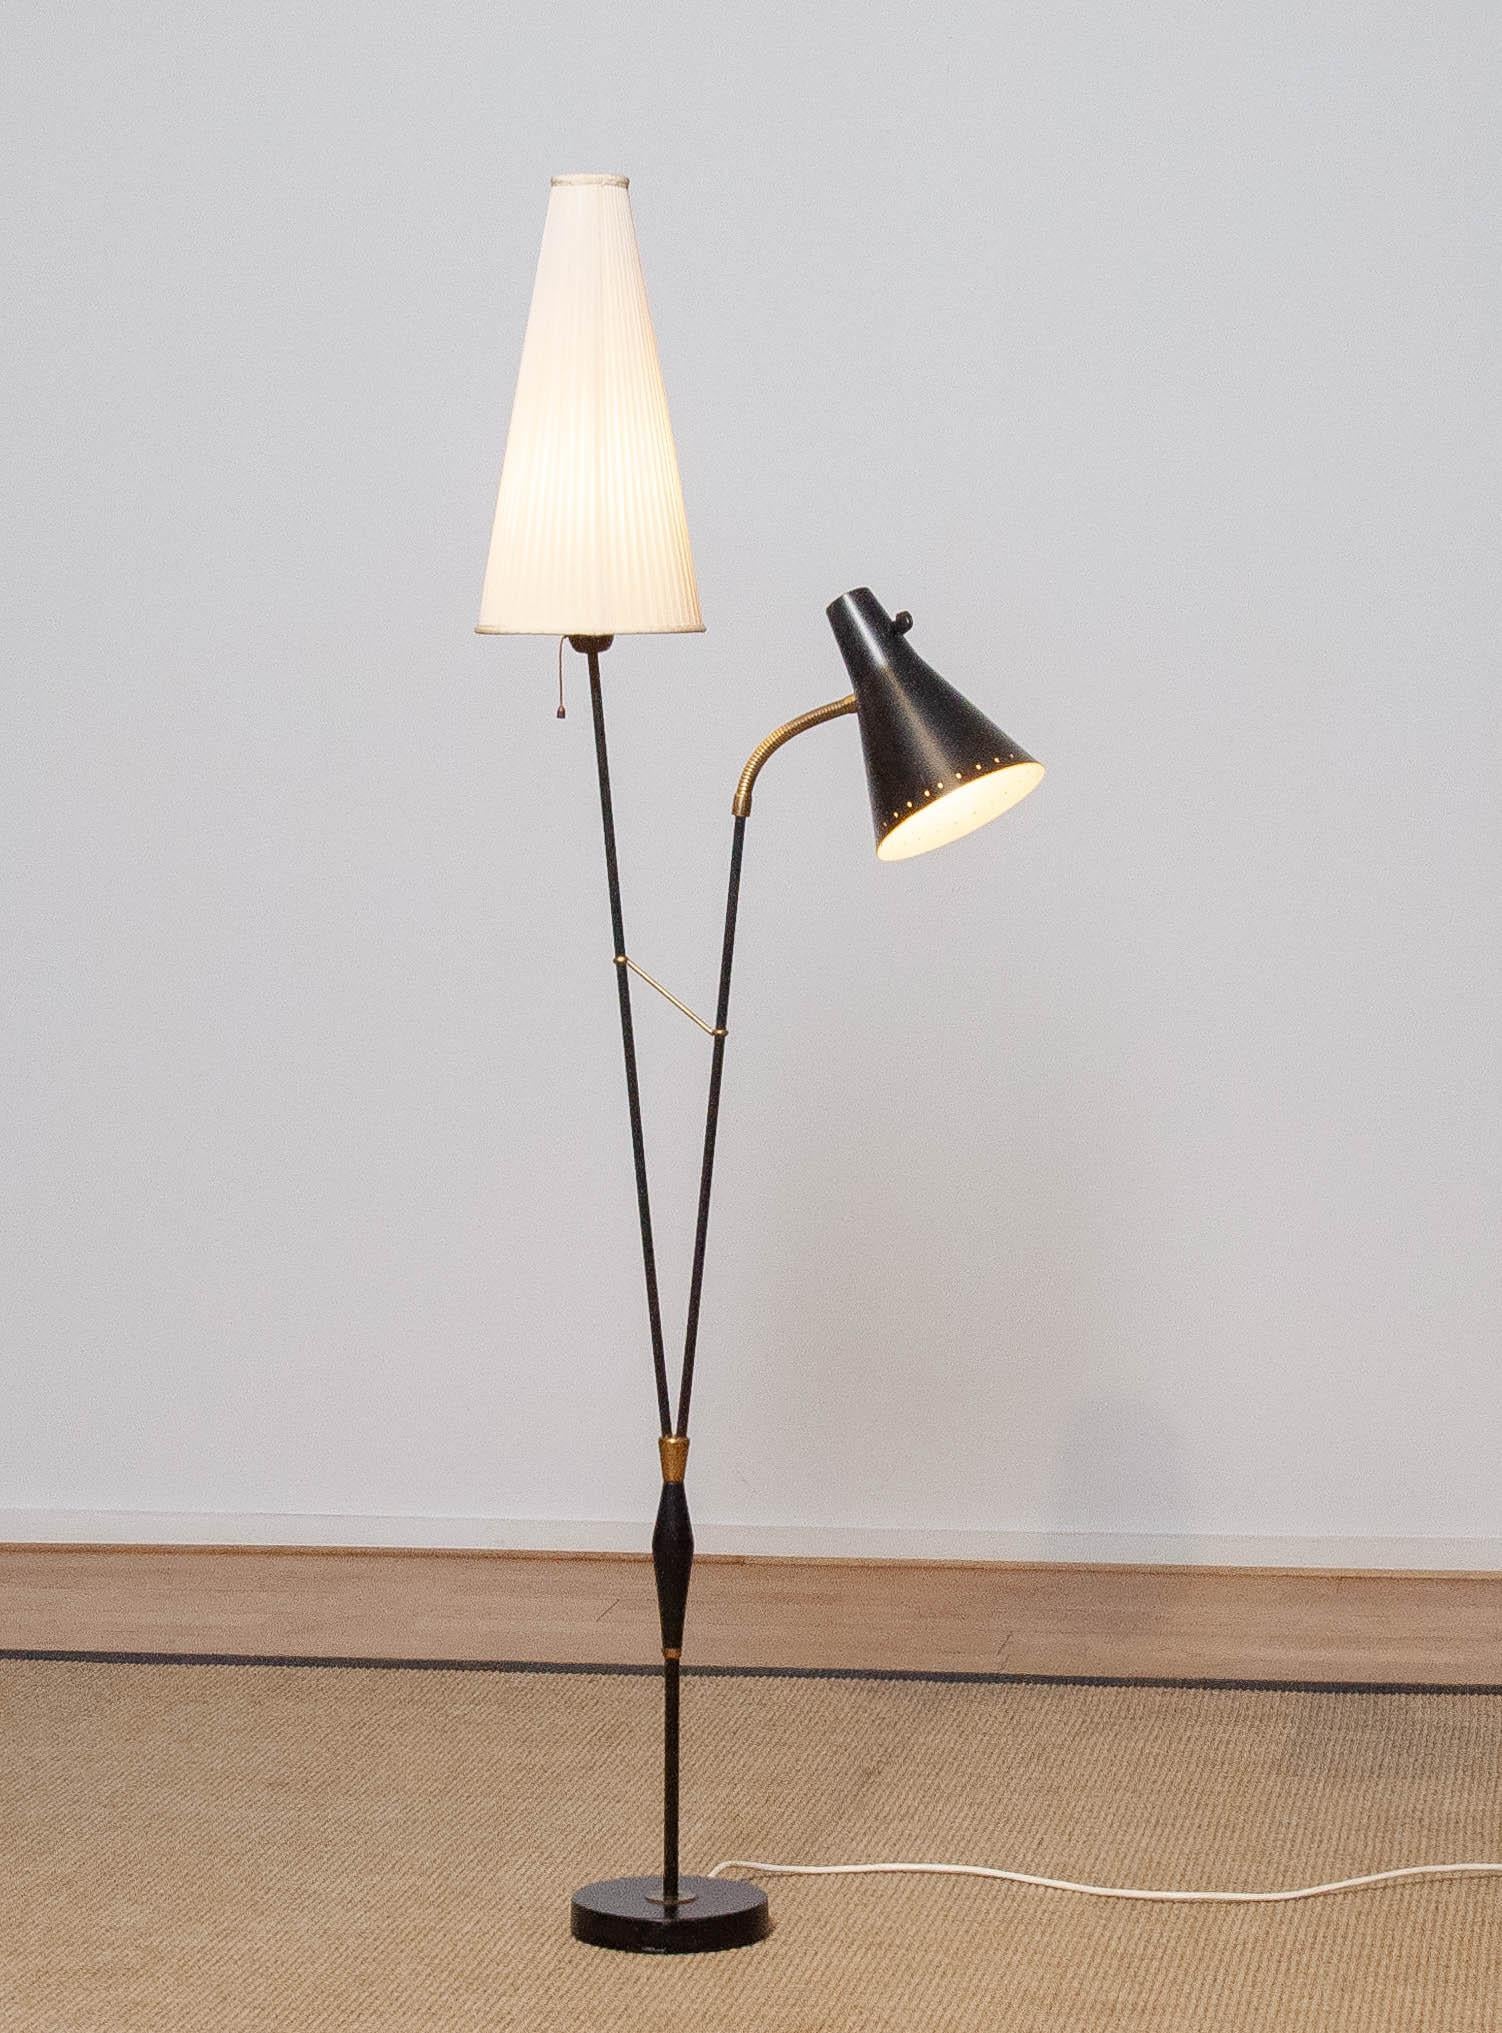 Beautiful floor / reading lamp designed by Hans Bergström for Ataljé Lyktan in Sweden from the 1950's. Brass and metal base in black. Both lamps can be separately switched on / off and technically in good condition.
Both screw fittings are for screw